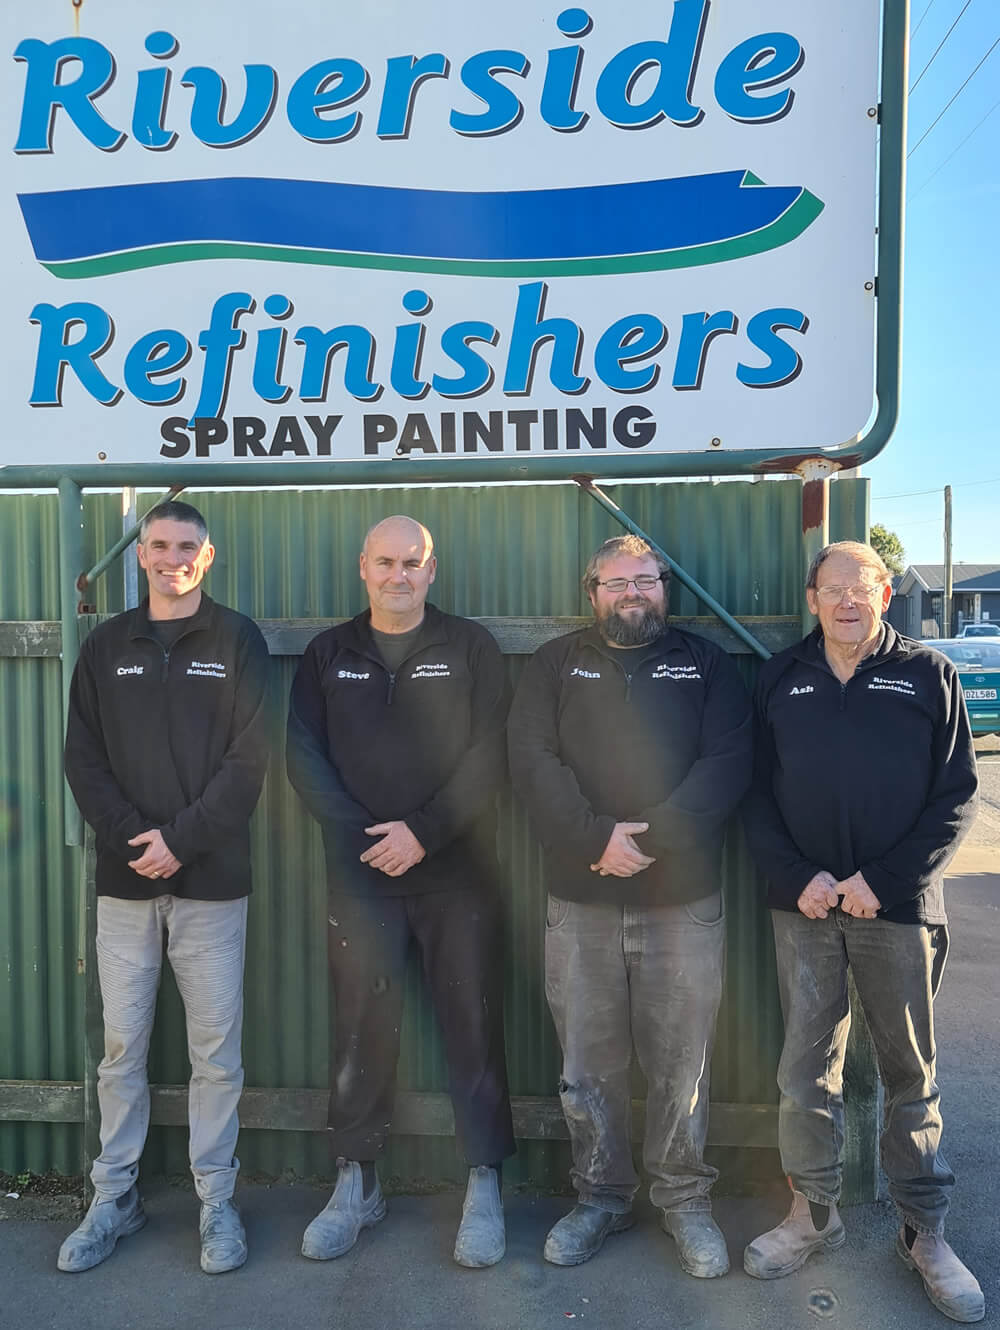 Craig And His Team Of Spray Painters At Riverside Refinishers In Marlborough NZ